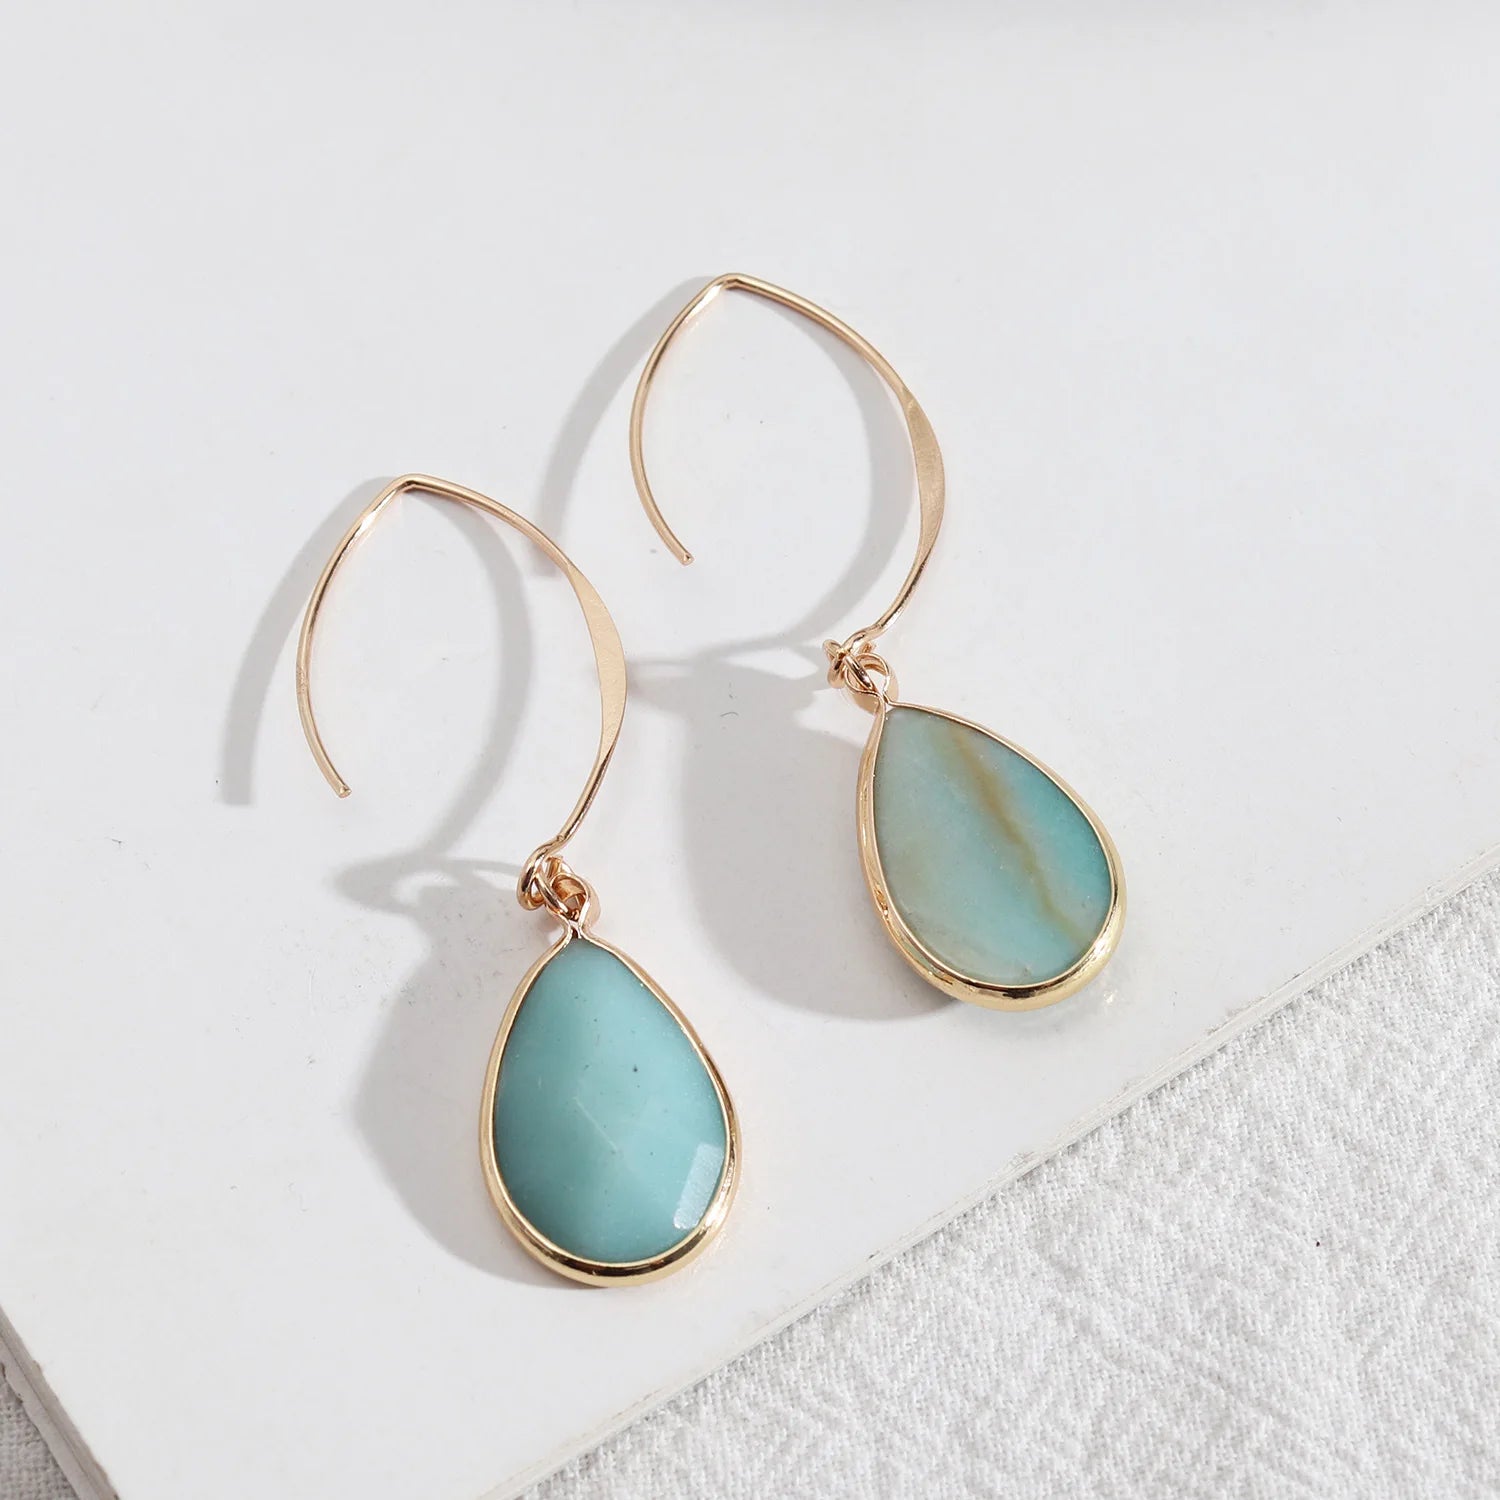 Amazonite "Tianhe" Earrings for Communication and Confidence